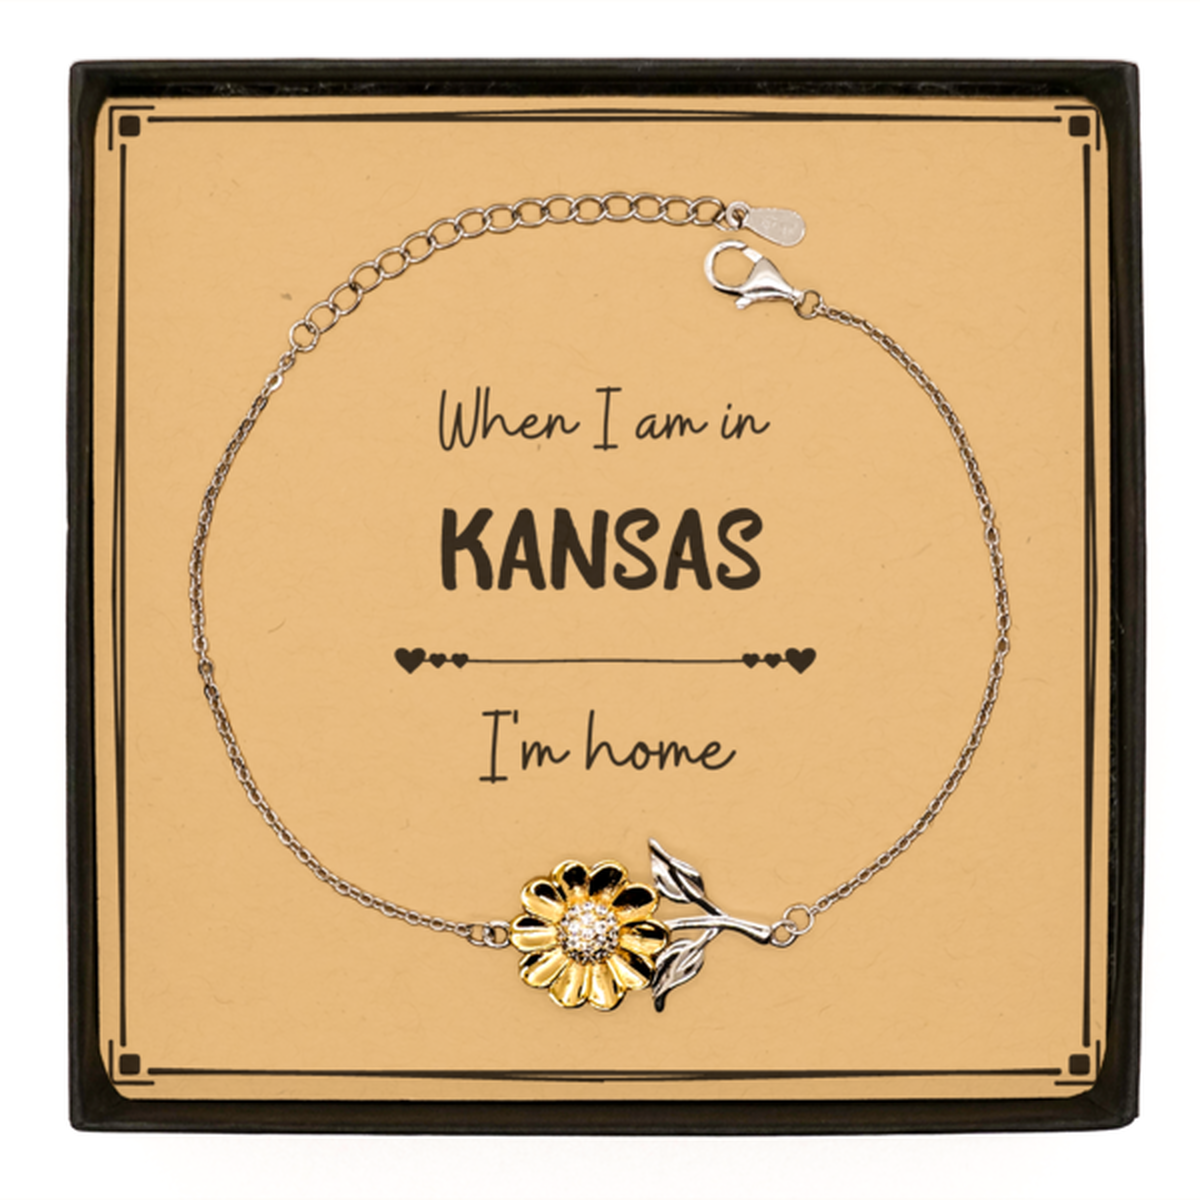 When I am in Kansas I'm home Sunflower Bracelet, Message Card Gifts For Kansas, State Kansas Birthday Gifts for Friends Coworker